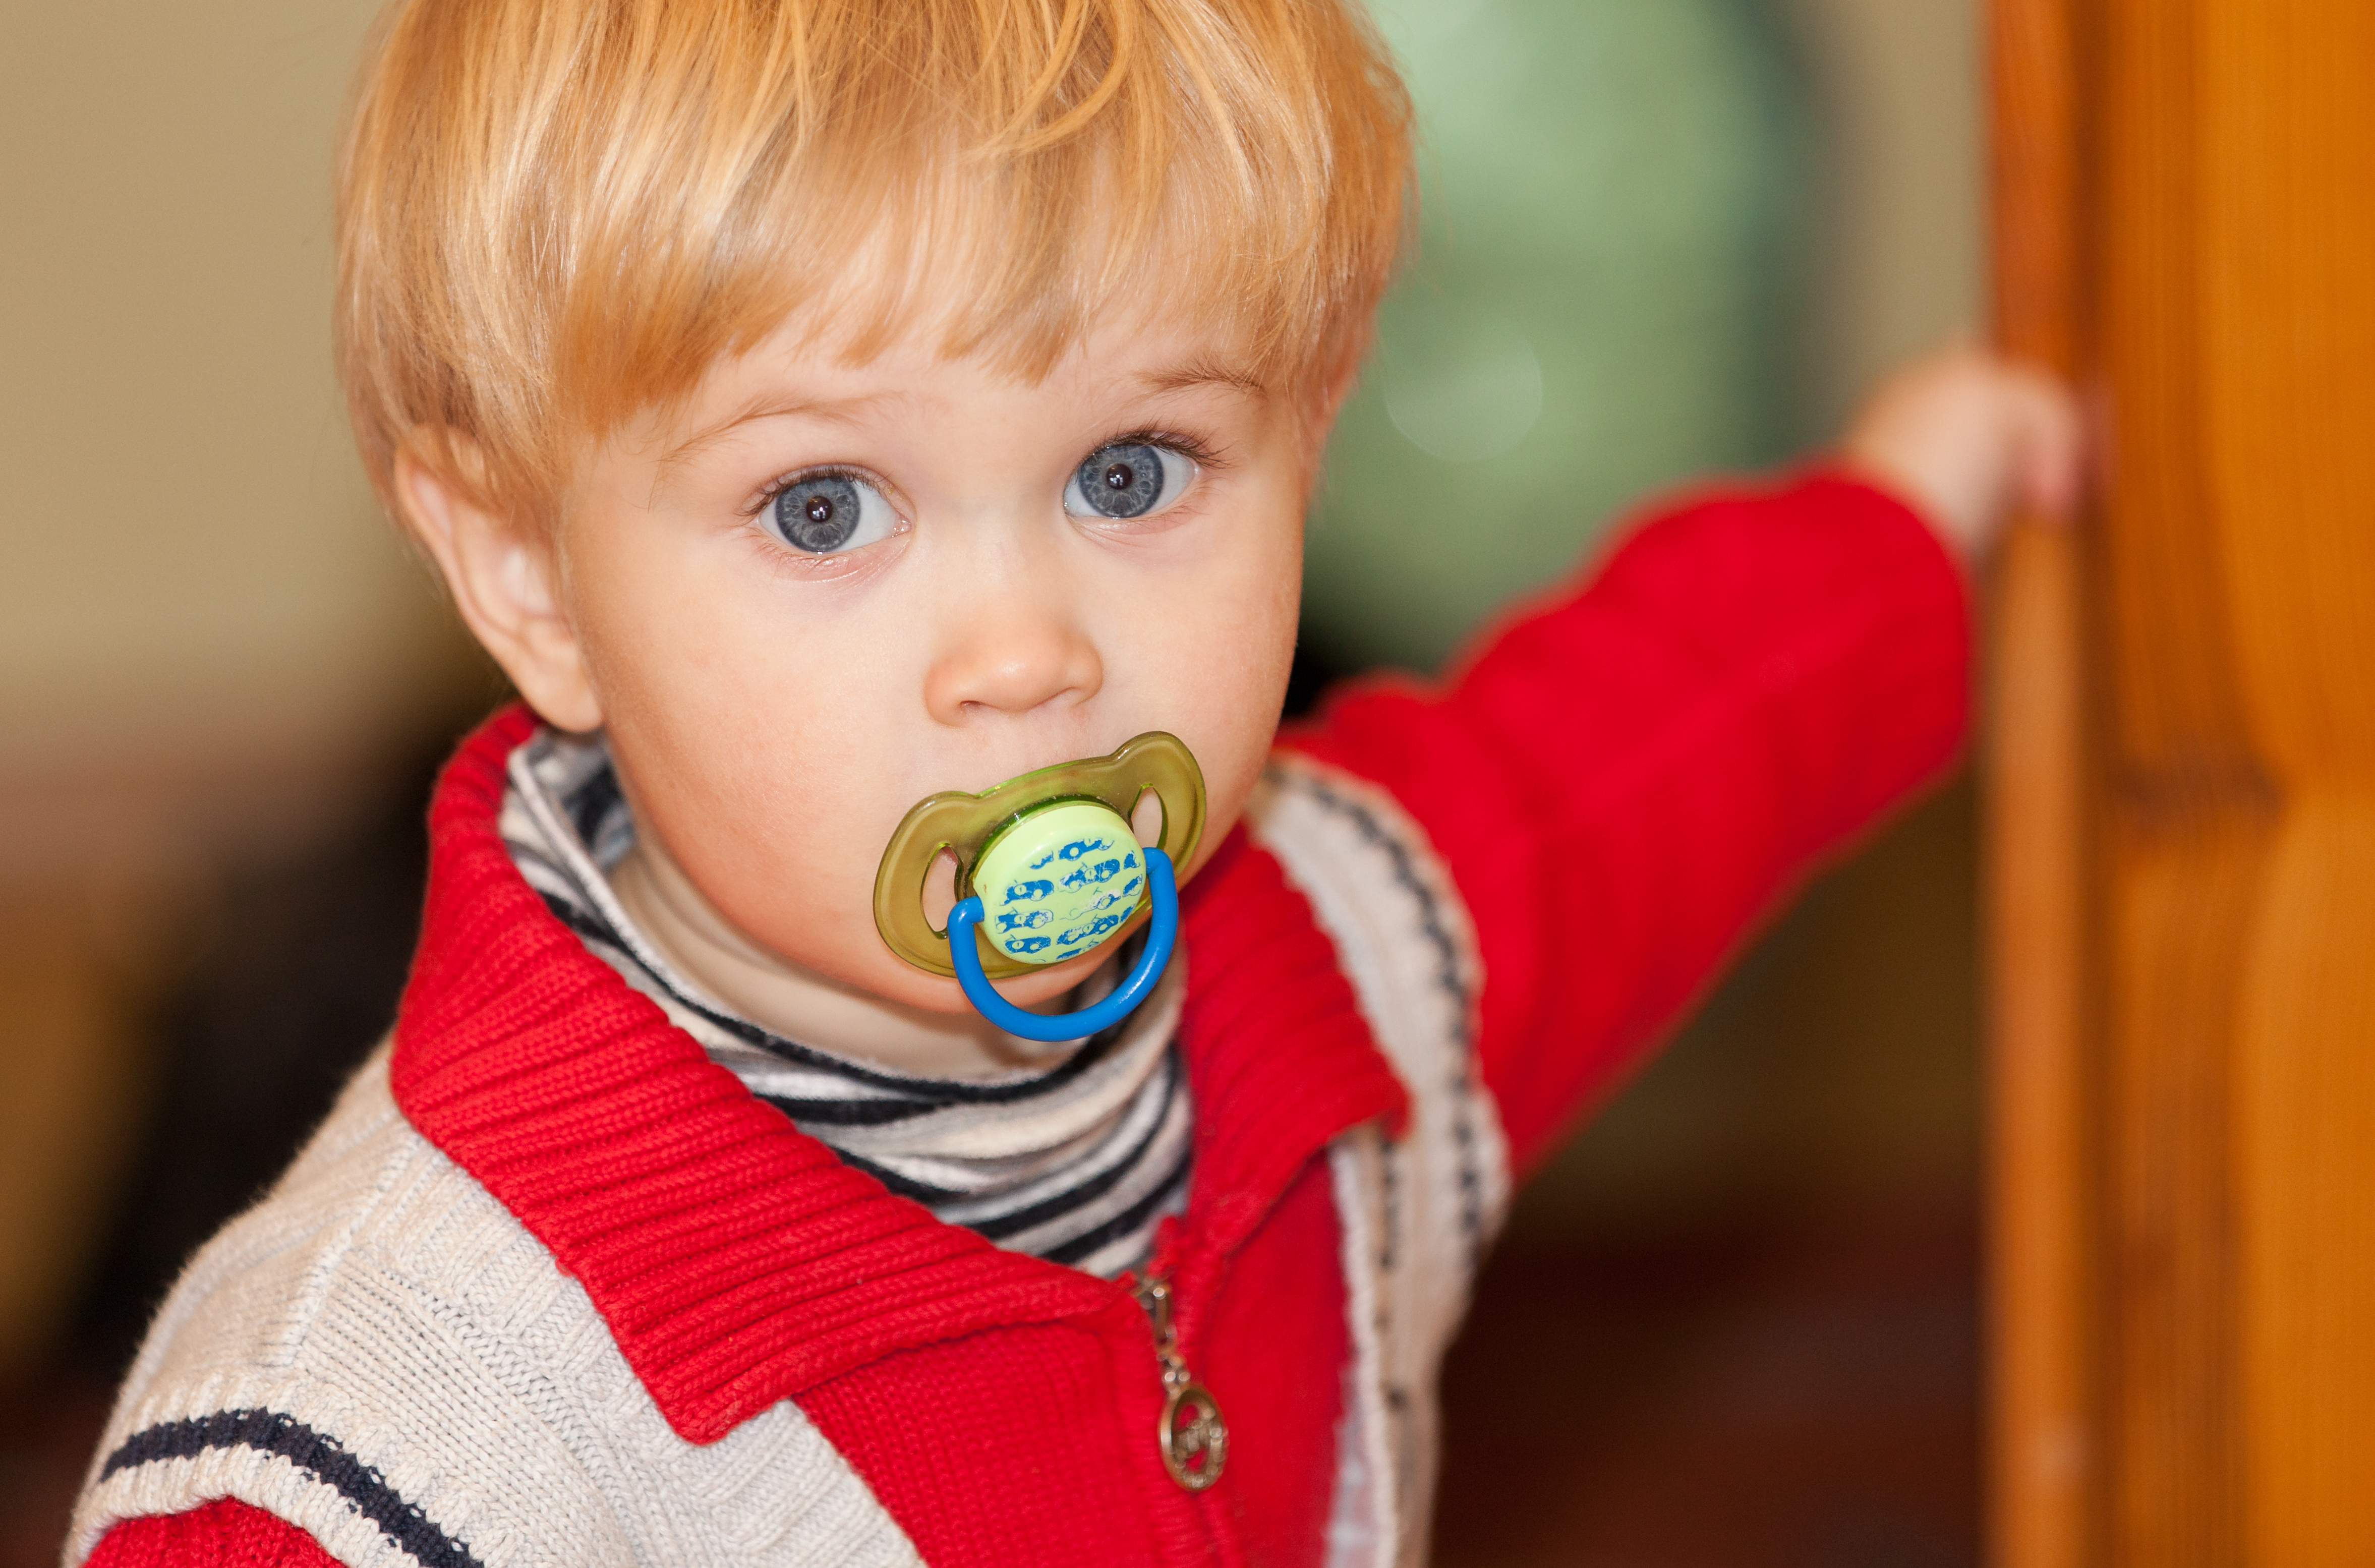 a 17-month old Catholic boy photographed in November 2014